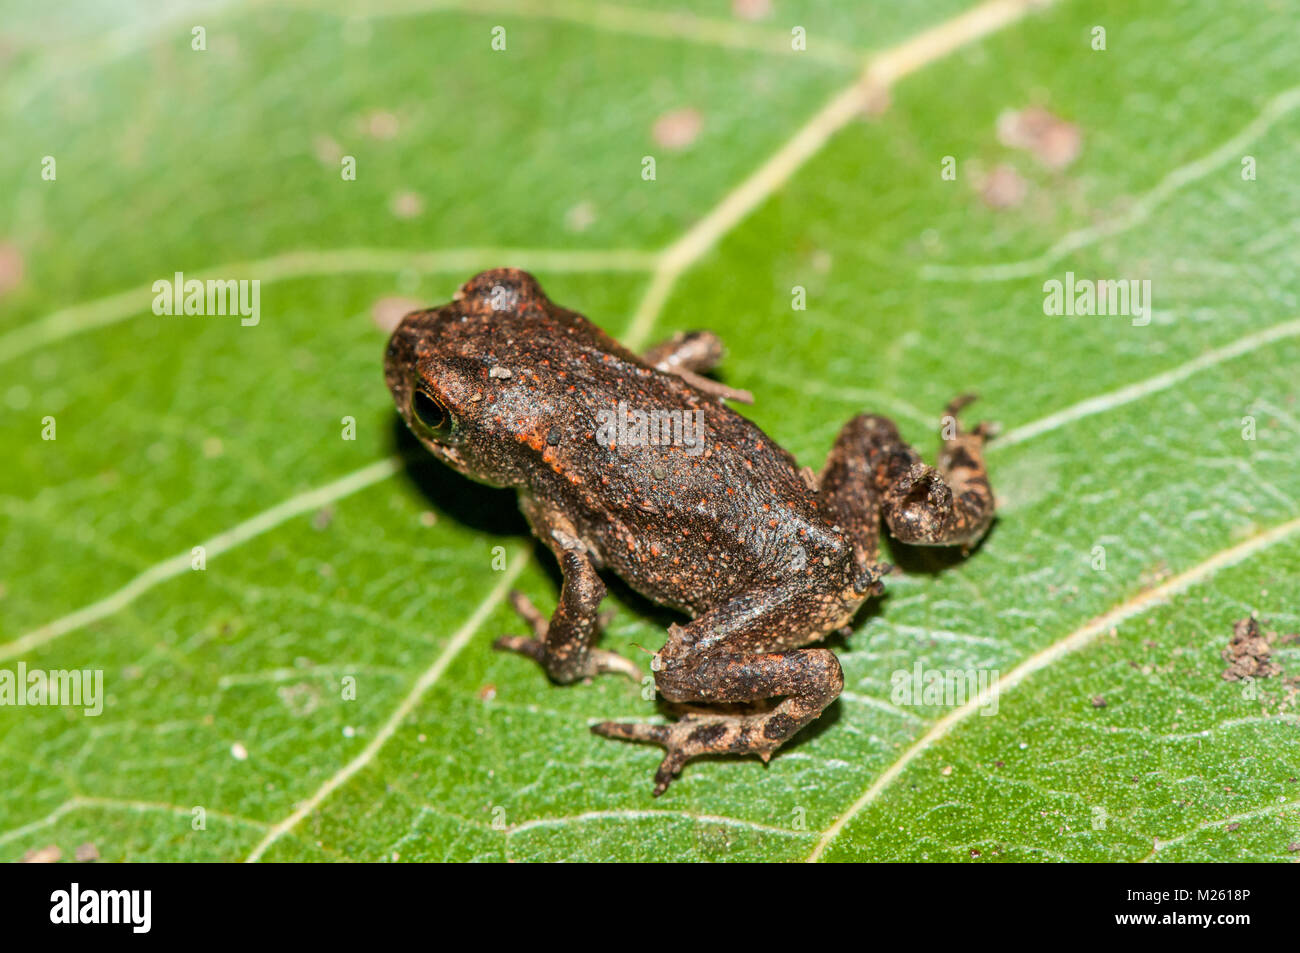 small common midwife toad (Alytes obstetricans obstetricans) on a green leaf, Banyoles, Catalonia, Spain Stock Photo